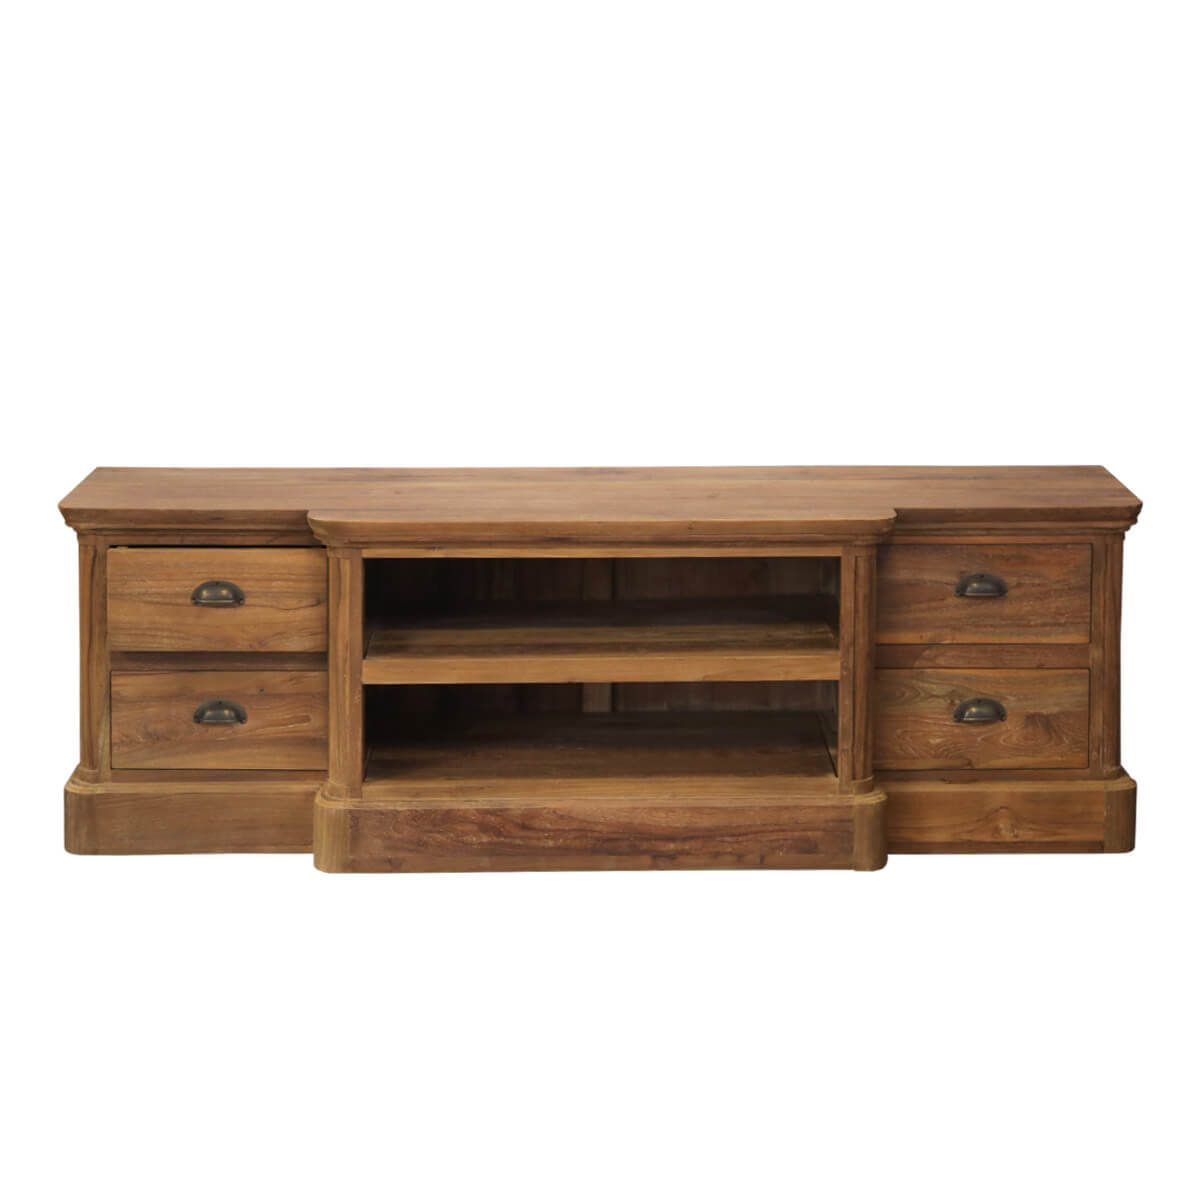 Bovey Modern Teak Wood Open Shelf 4 Drawer Tv Stand With Modern Wood Tv Stands (View 14 of 15)